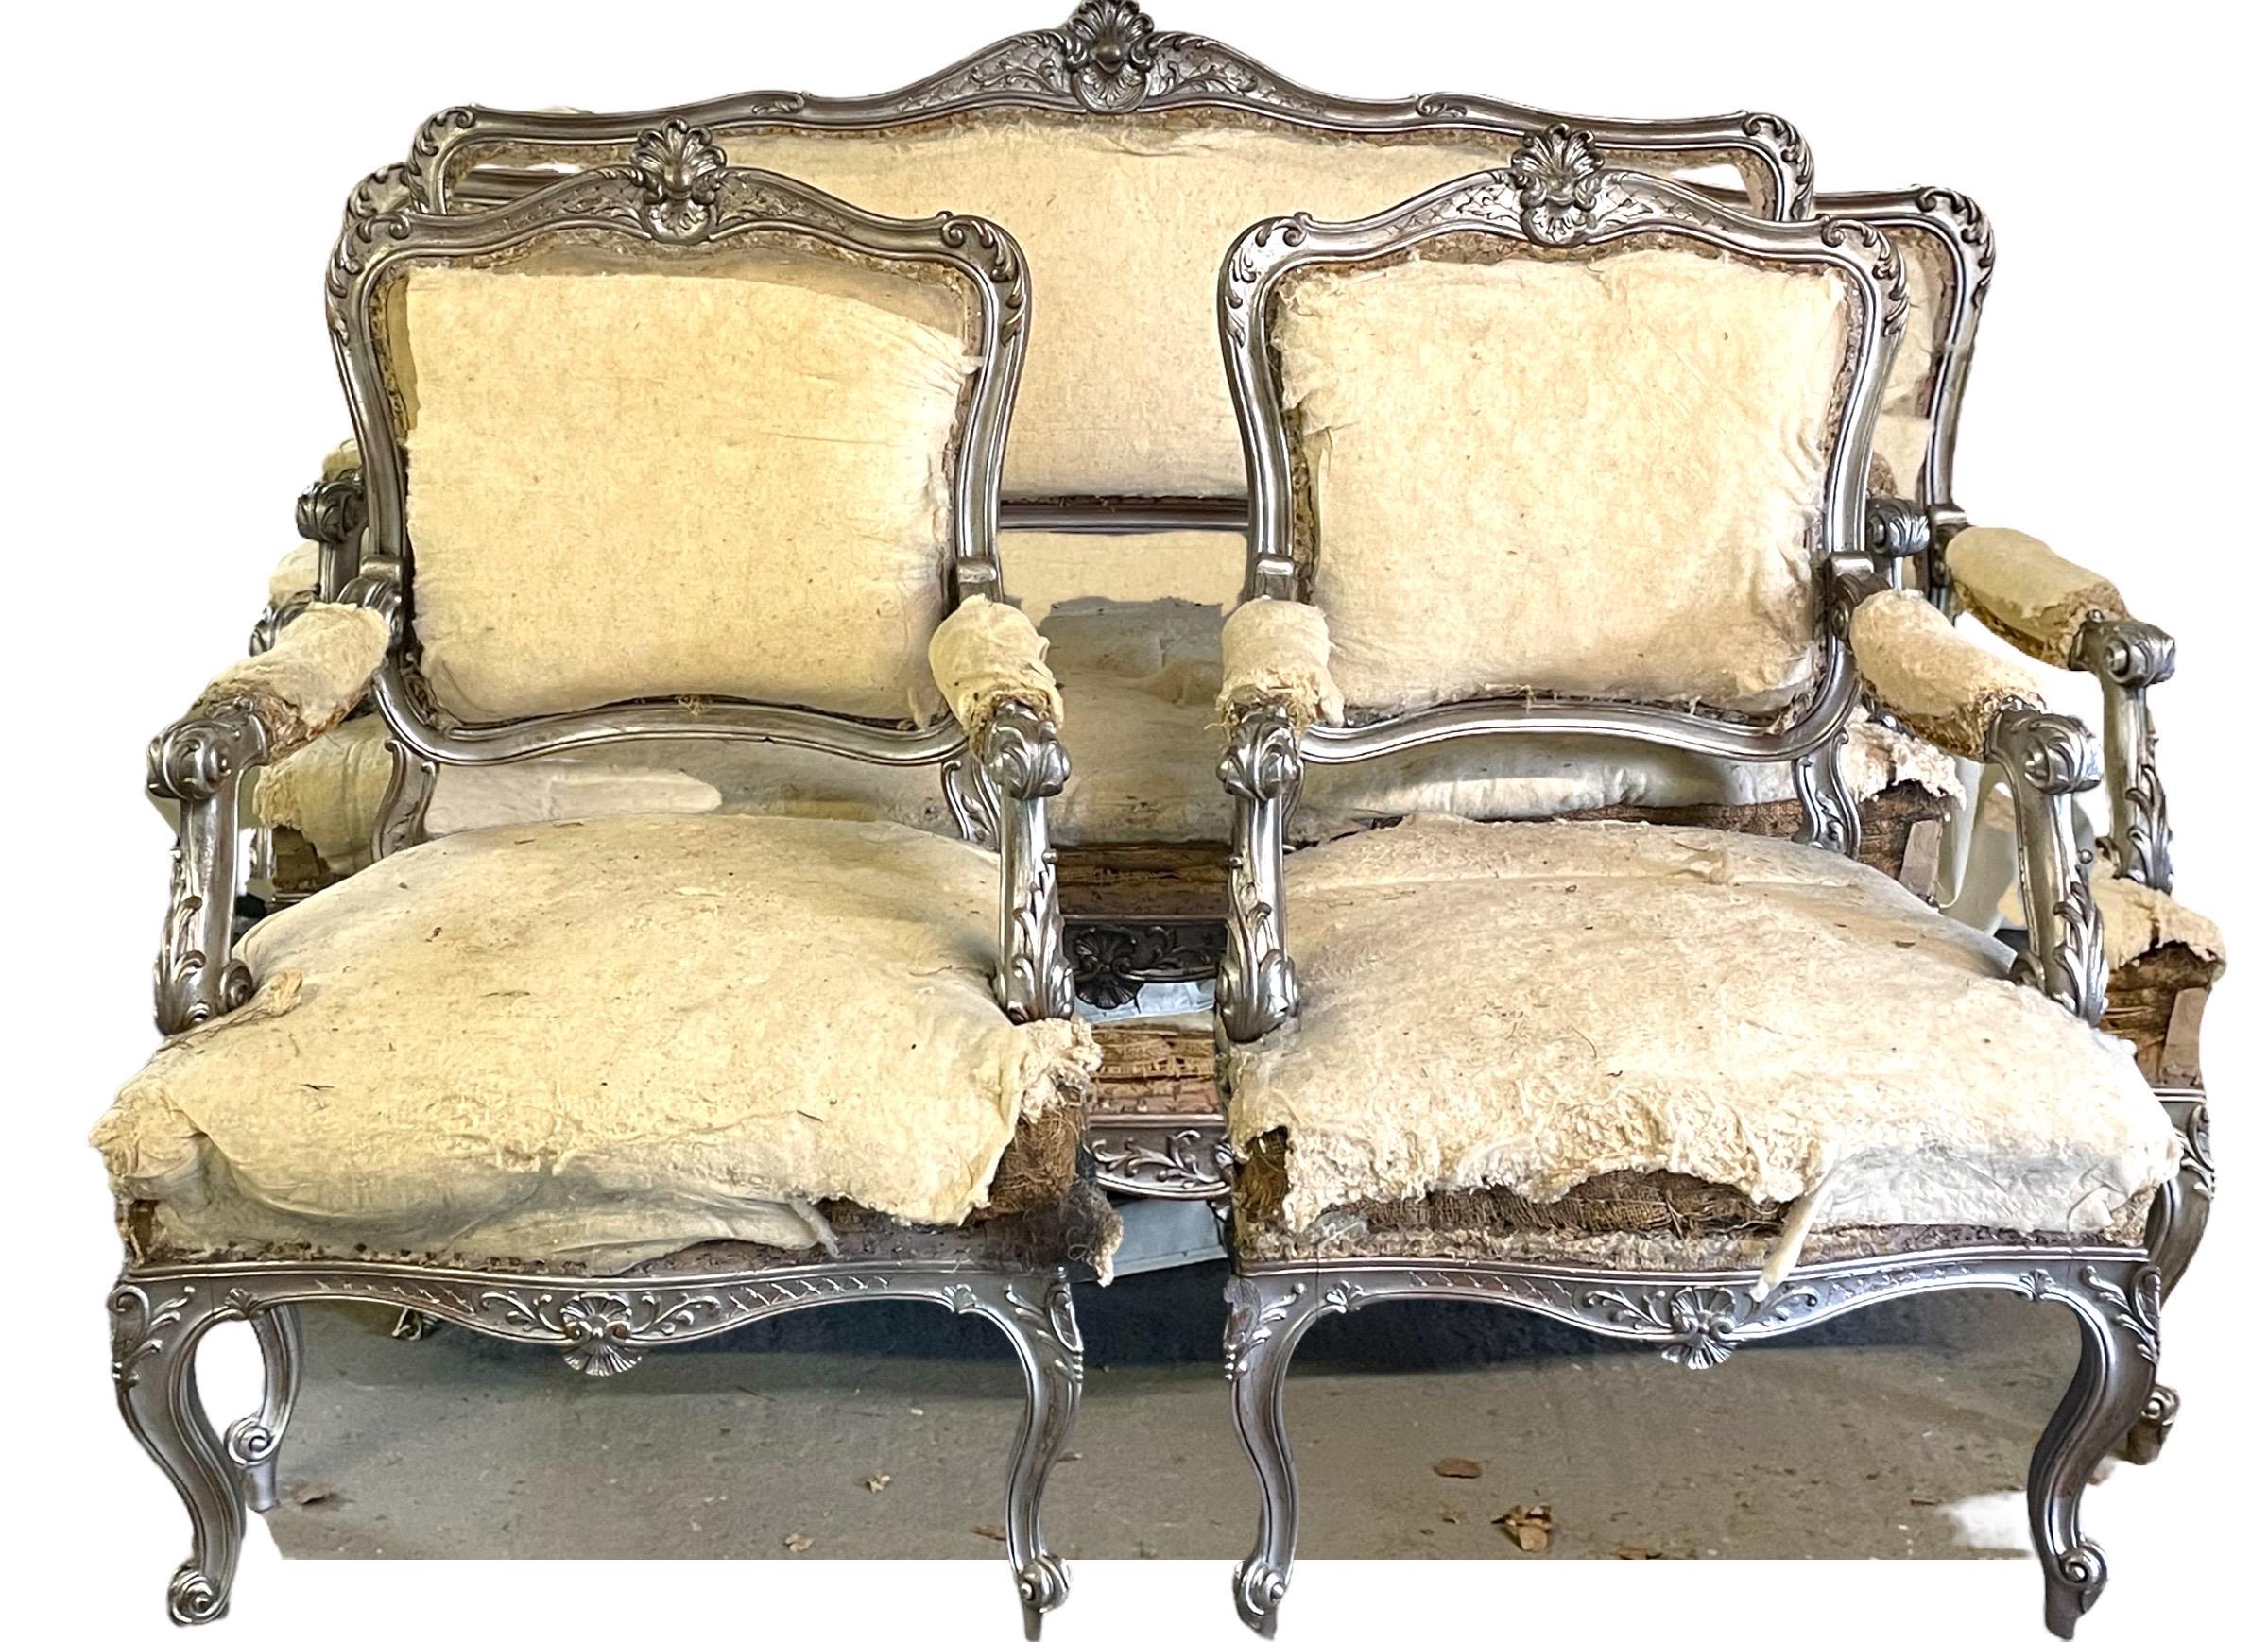 French Louis XV style Silver Giltwood Carved Three-Piece Salon or Parlor Suite
Very fine original walnut frame three-piece salon suite, includes one settee and two armchairs, the suite has been partially stripped back and is ready to be recovered,